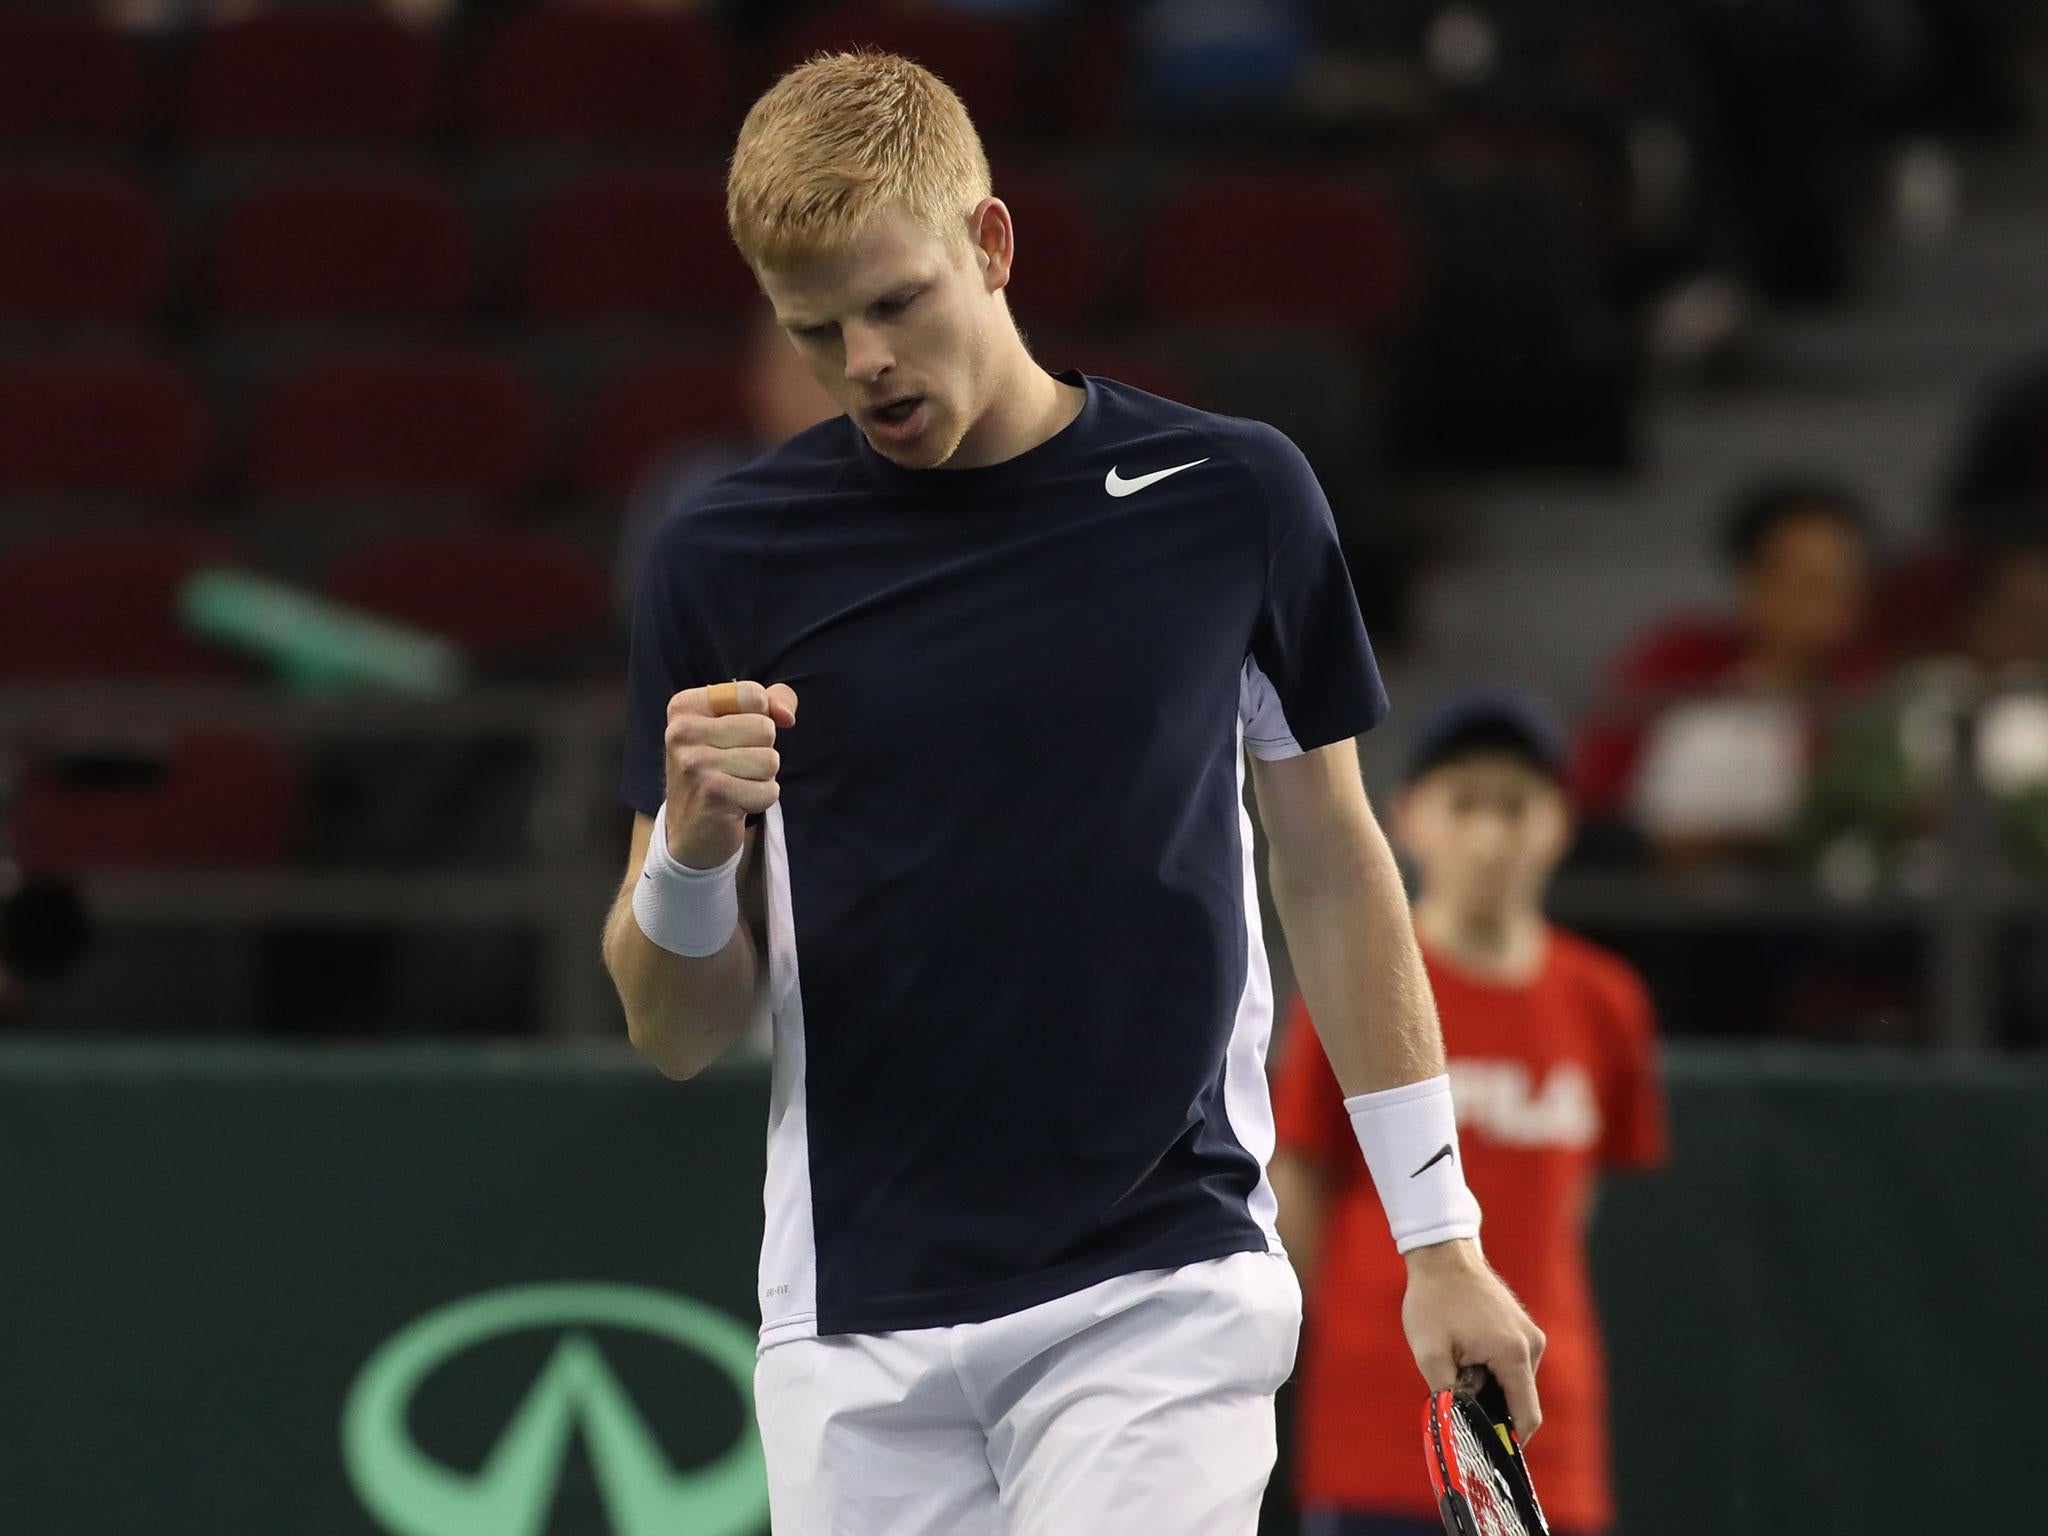 Kyle Edmund beat Adrian Mannarino after the Frenchman conceded the final game following an angry outburst